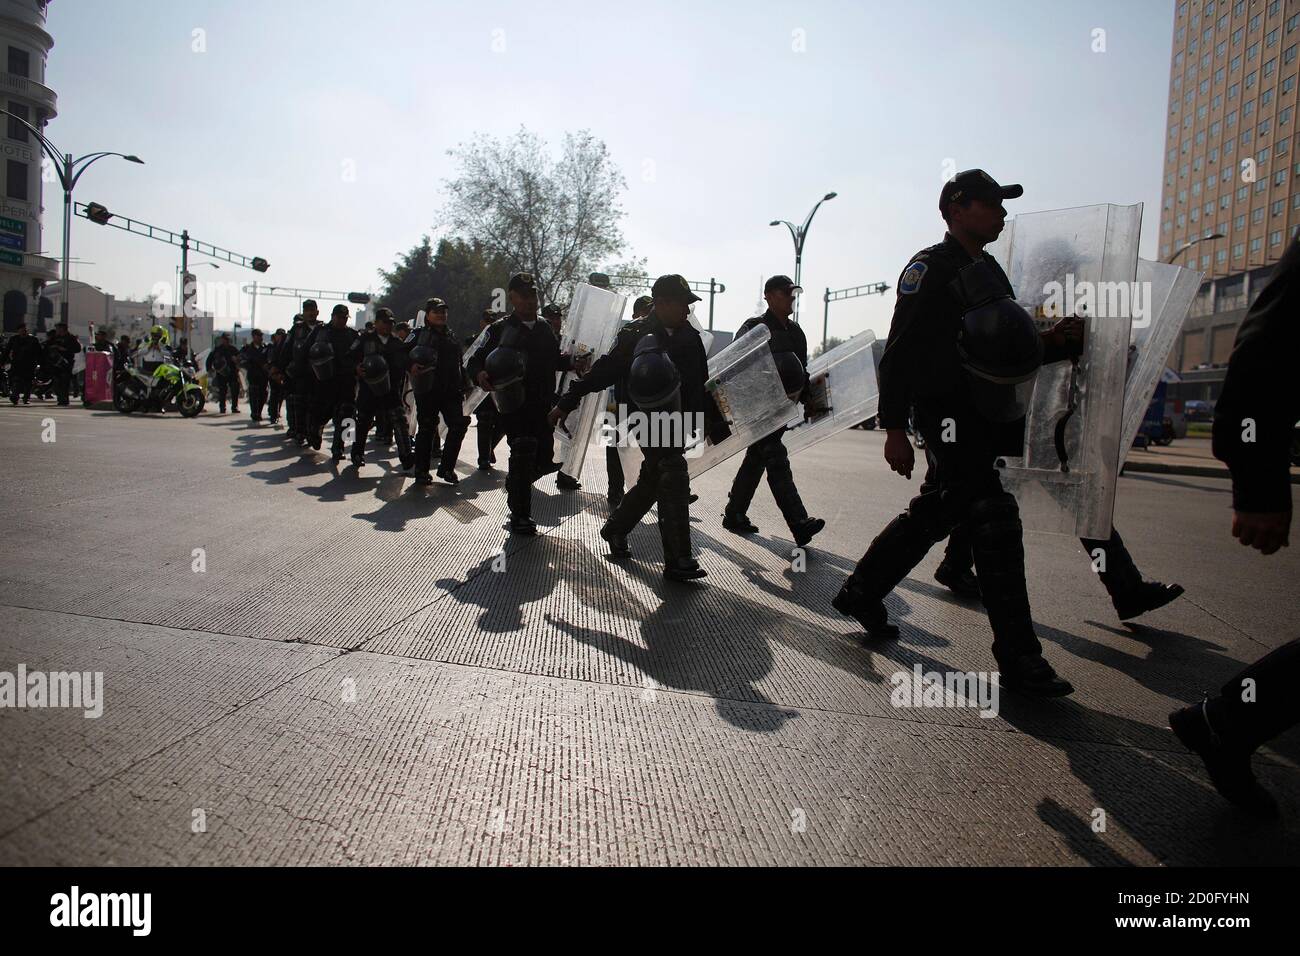 Riot policemen march toward the perimeter of the Senate building to prevent demonstrations in Mexico City December 4, 2013. Mexican lawmakers are poised to send a landmark energy bill to Senate committees to start debate on a cornerstone of President Enrique Pena Nieto's economic reform drive, a top ruling party lawmaker said on Wednesday. The bill, which would open Mexico's state-dominated energy sector to private investment in a bid to boost lagging output and growth in Latin America's No.2 economy, will still need approval of the Senate and lower house of Congress. REUTERS/Tomas Bravo (MEXI Stock Photo